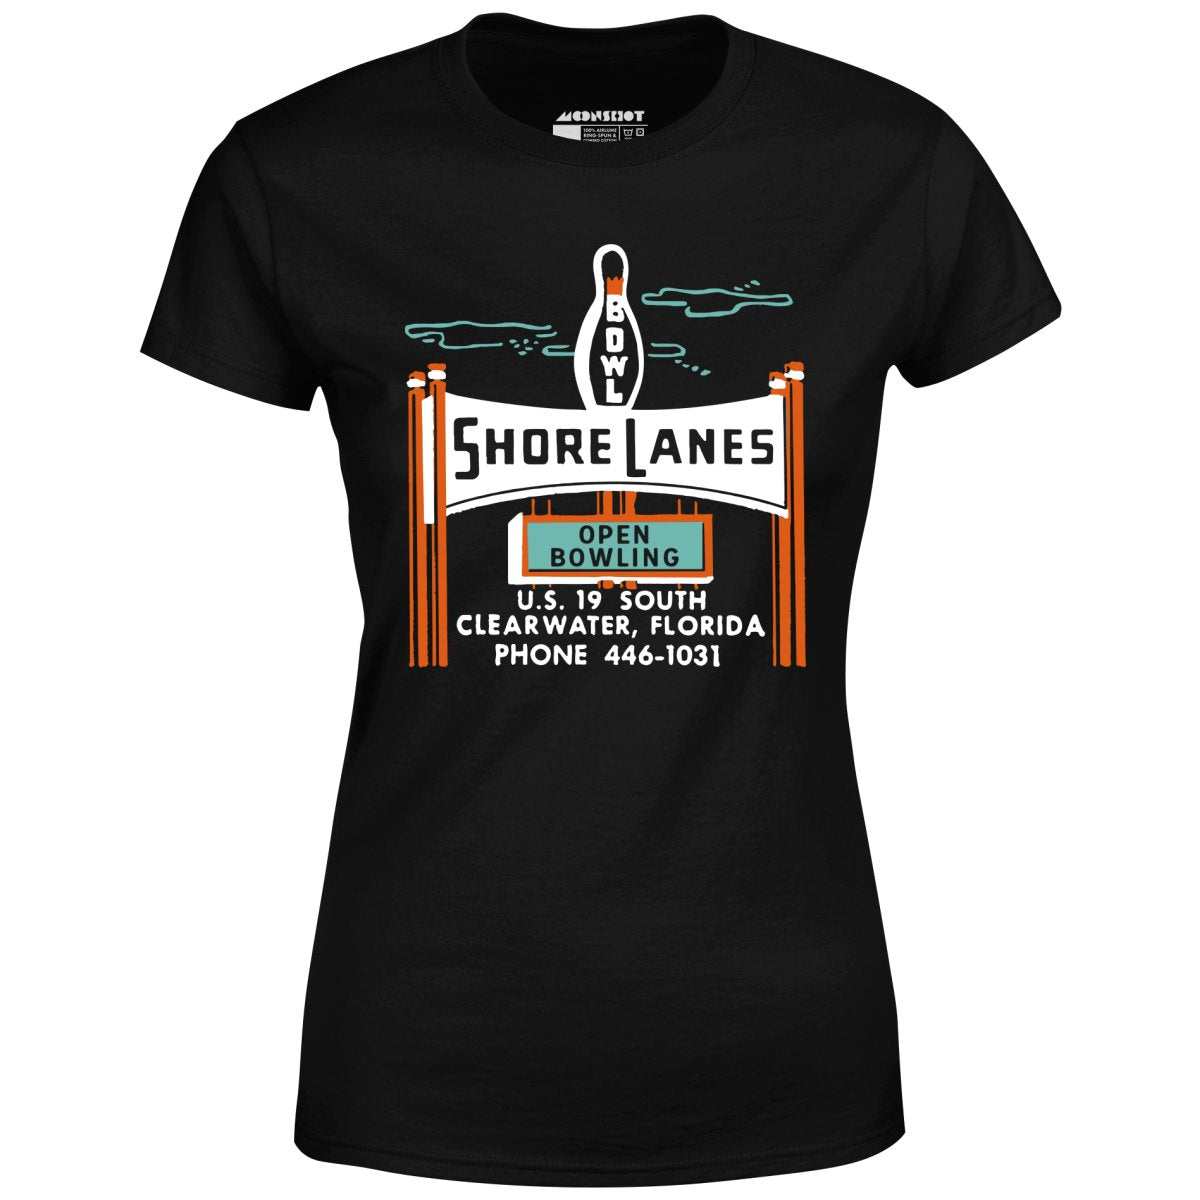 Shore Lanes - Clearwater, FL - Vintage Bowling Alley - Women's T-Shirt